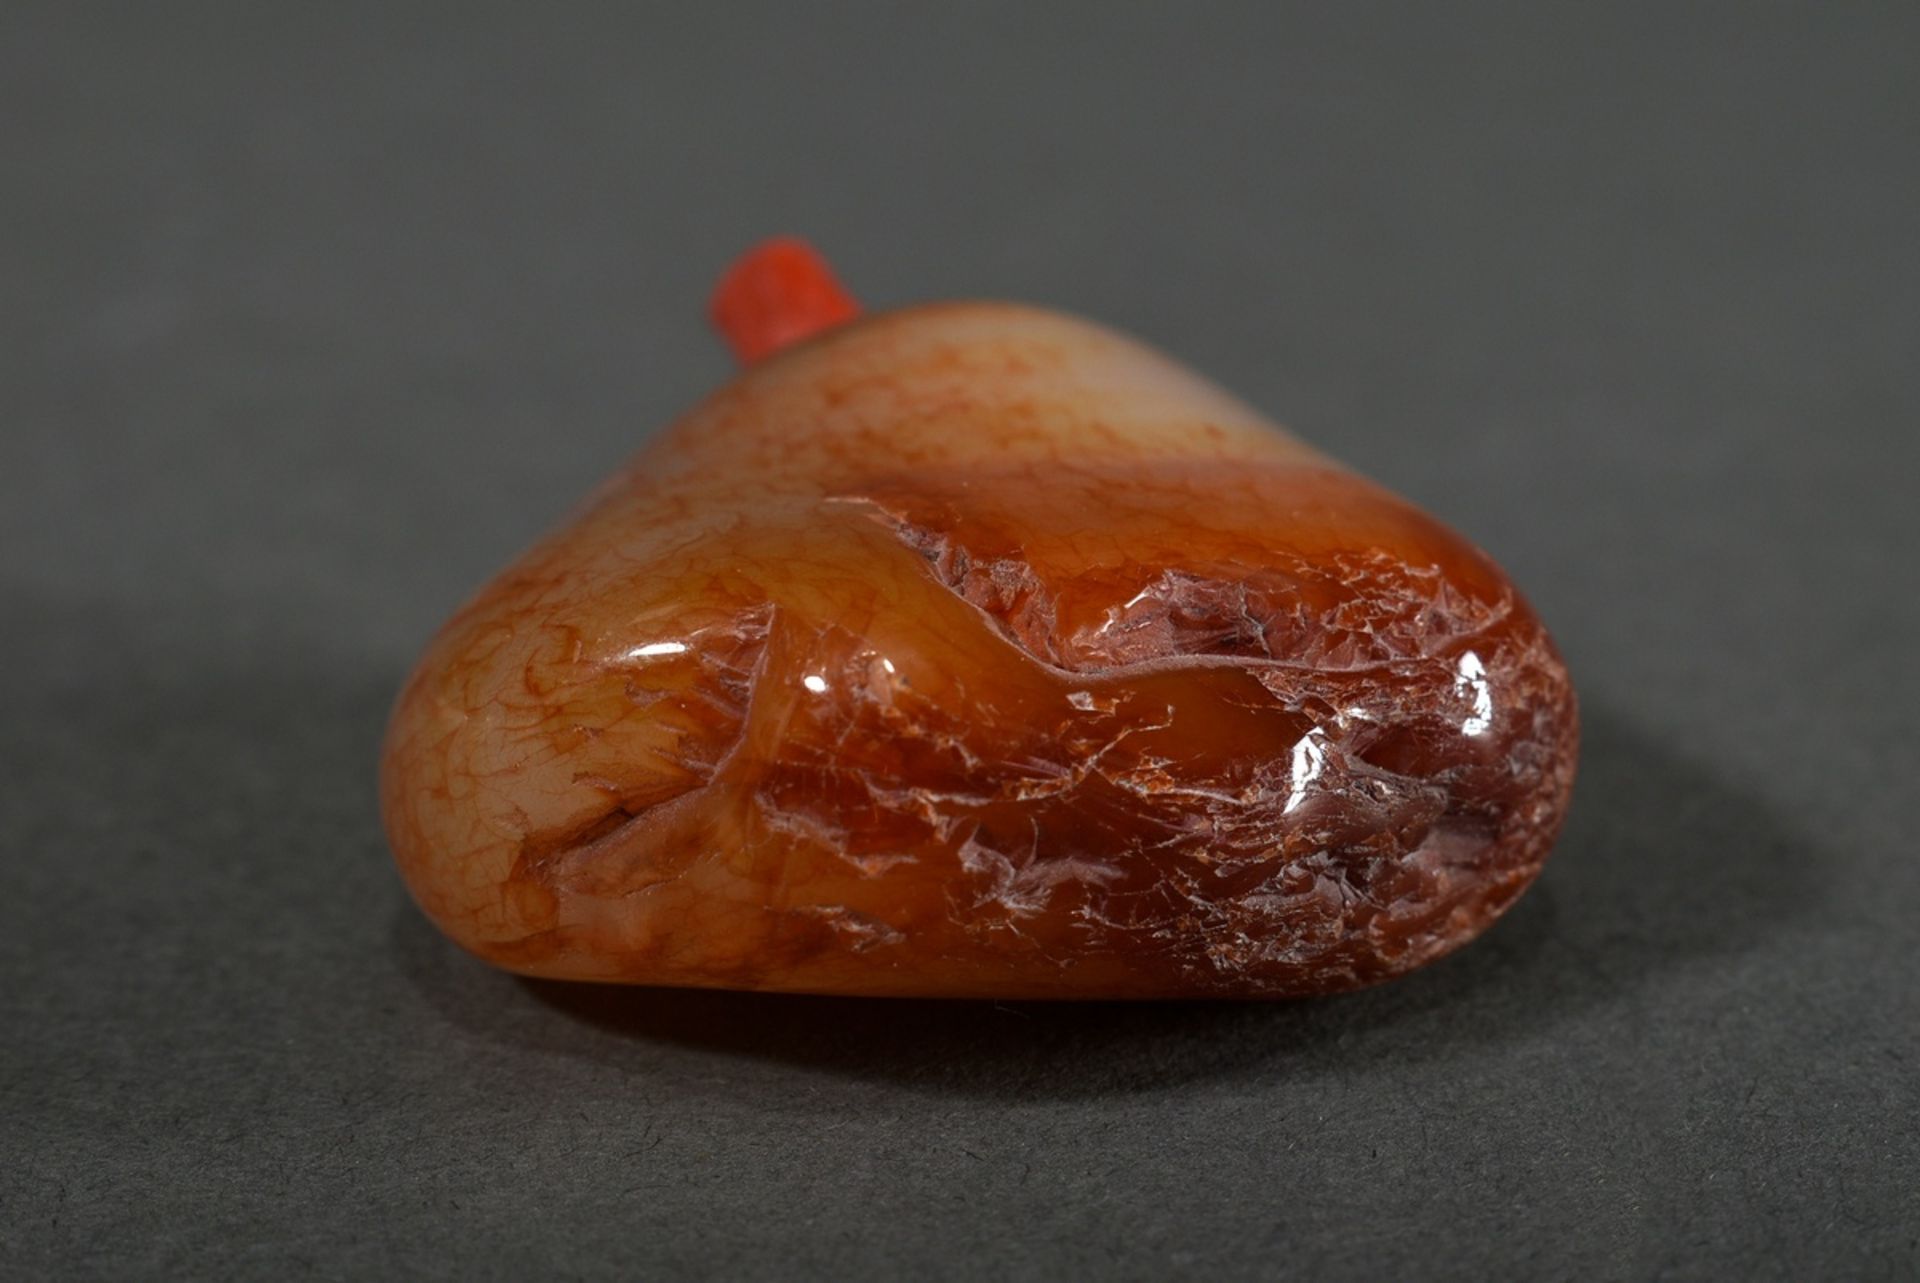 Chalcedony pebble as snuffbottle, well hollowed, closure with coral branch, China probably Qing Dyn - Image 3 of 4